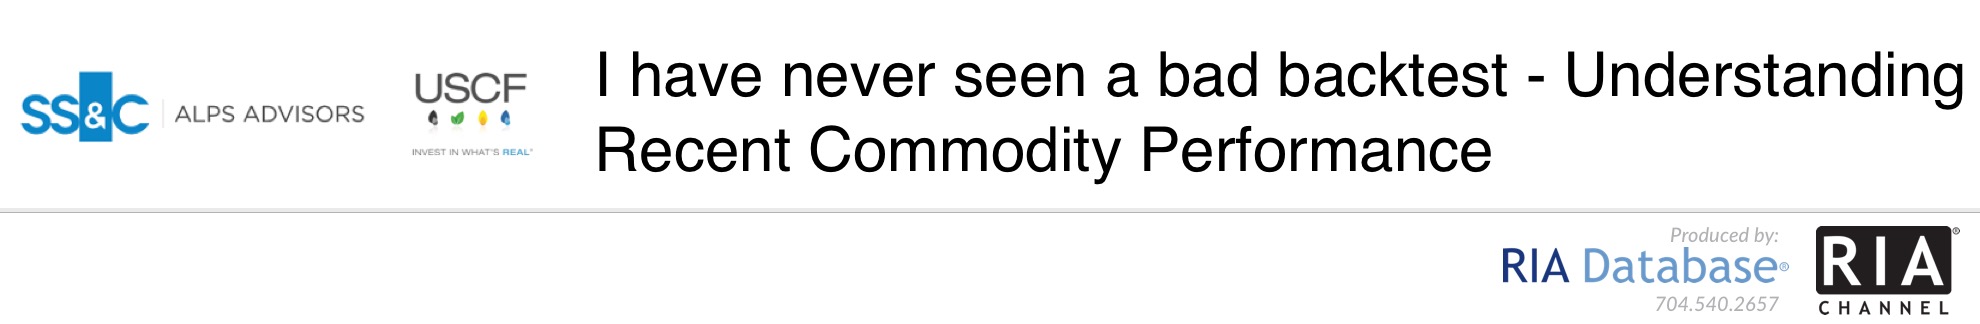 I have never seen a bad backtest - Understanding Recent Commodity Performance